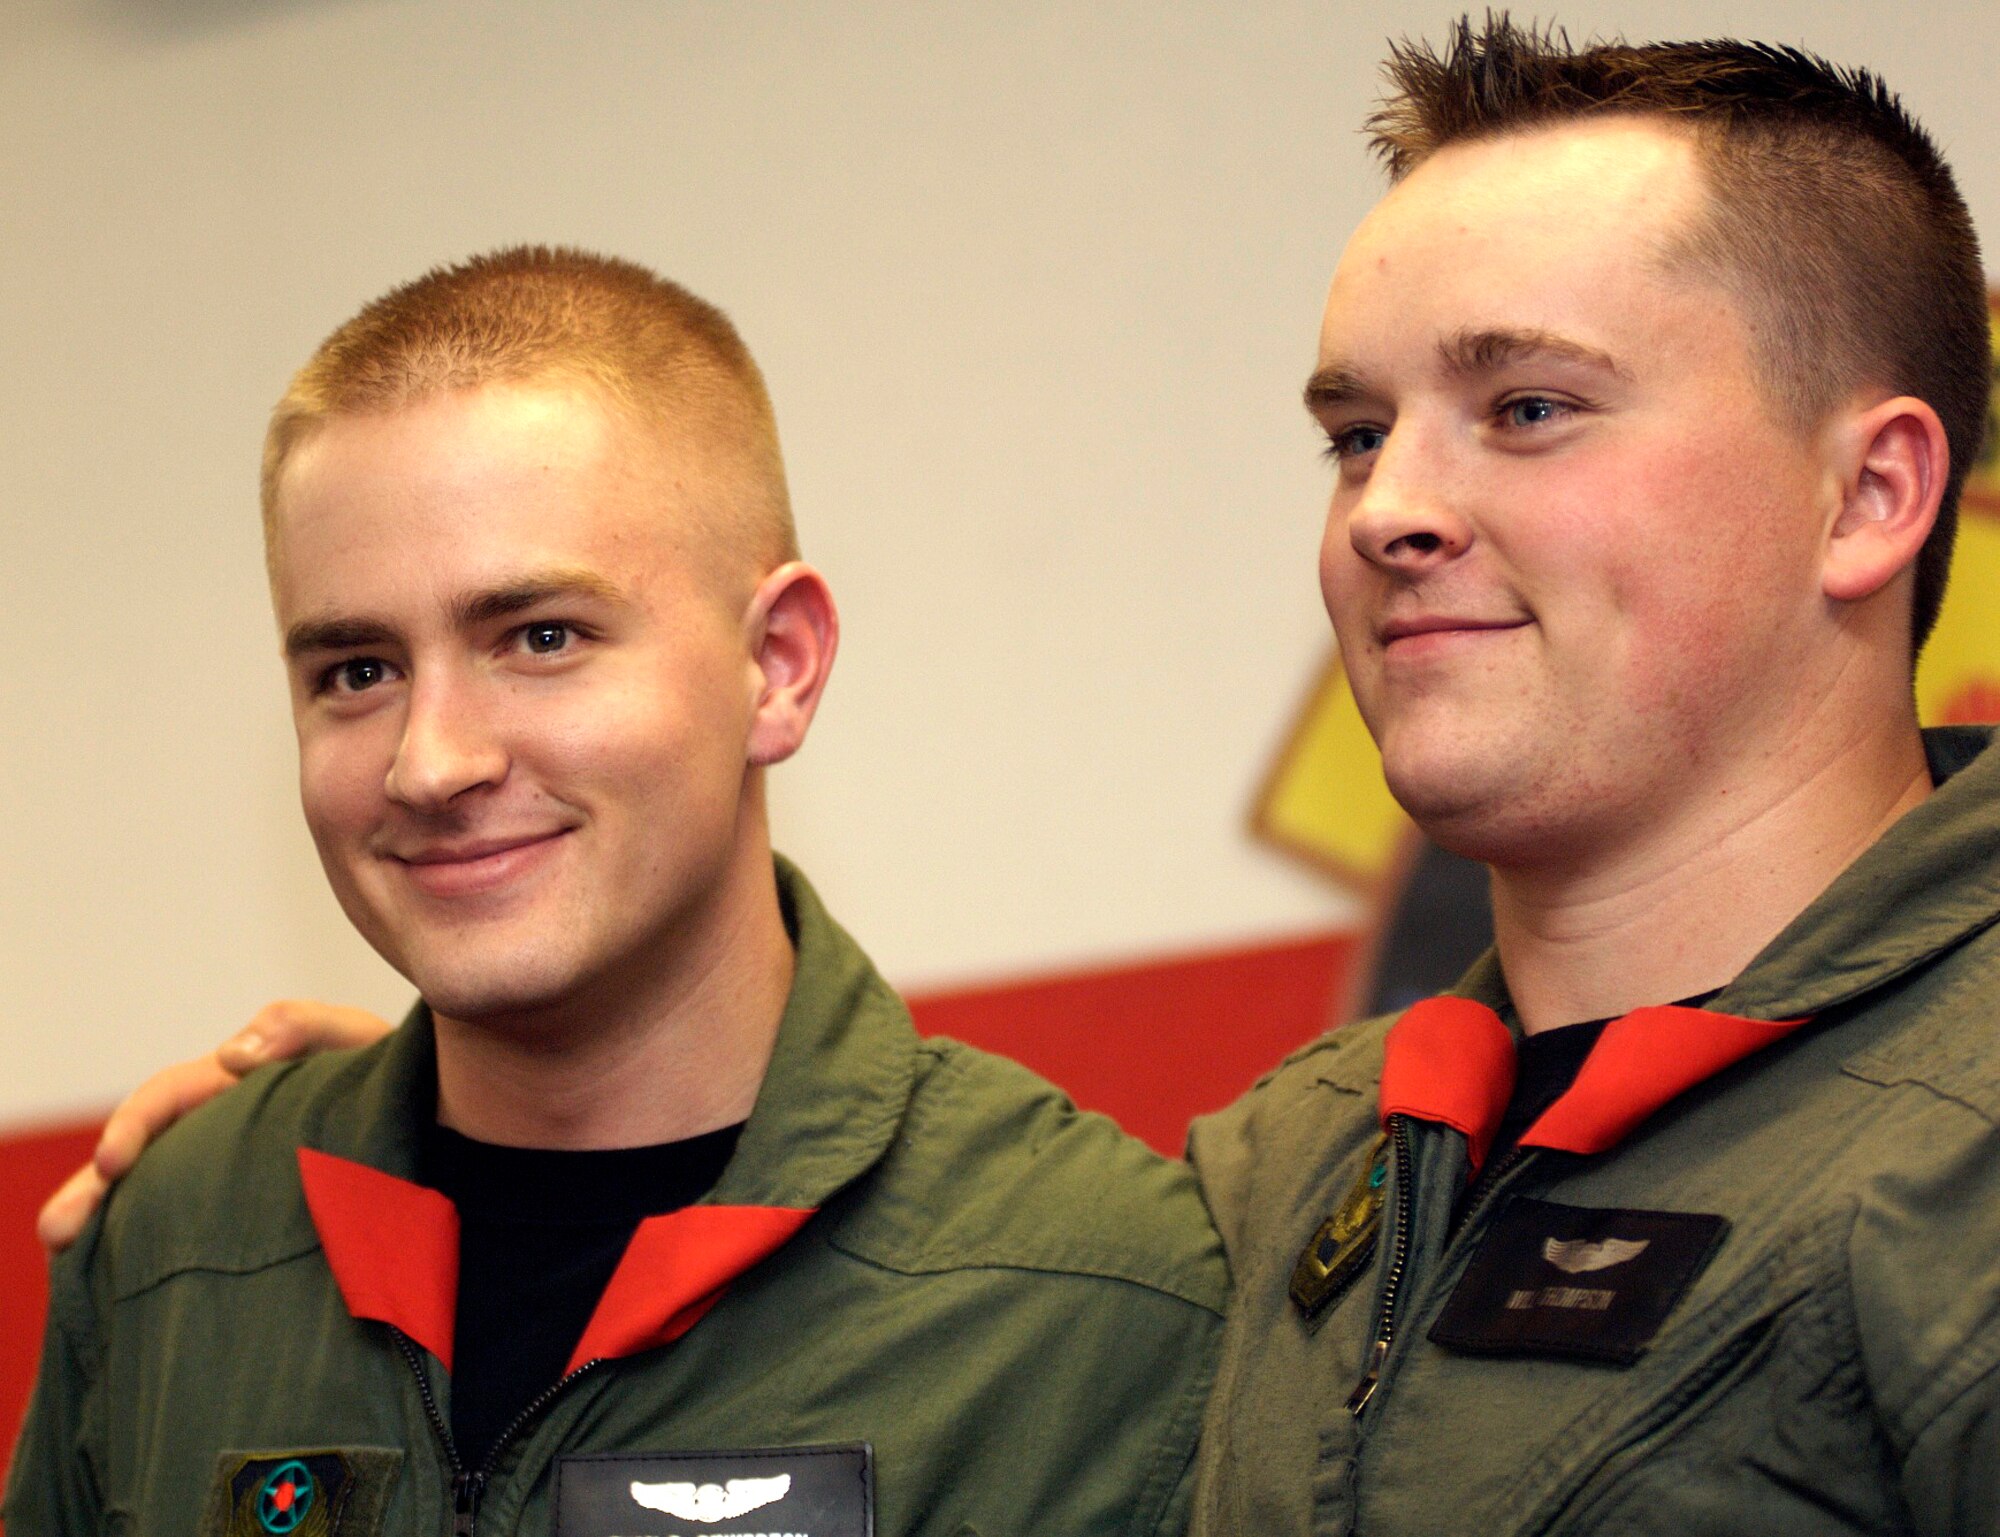 Airman 1st Class Evan Pinkerton, left, and 1st Lt. Will Thompson stand together after a ?scarfing ceremony? at the 551st Special Operations Squadron, here. Airman Pinkerton is the last flight engineer student to graduate from the squadron, and Lieutenant Thompson is the final pilot to graduate. (U.S. Air Force photo by Lt. Col. Alex Carothers)